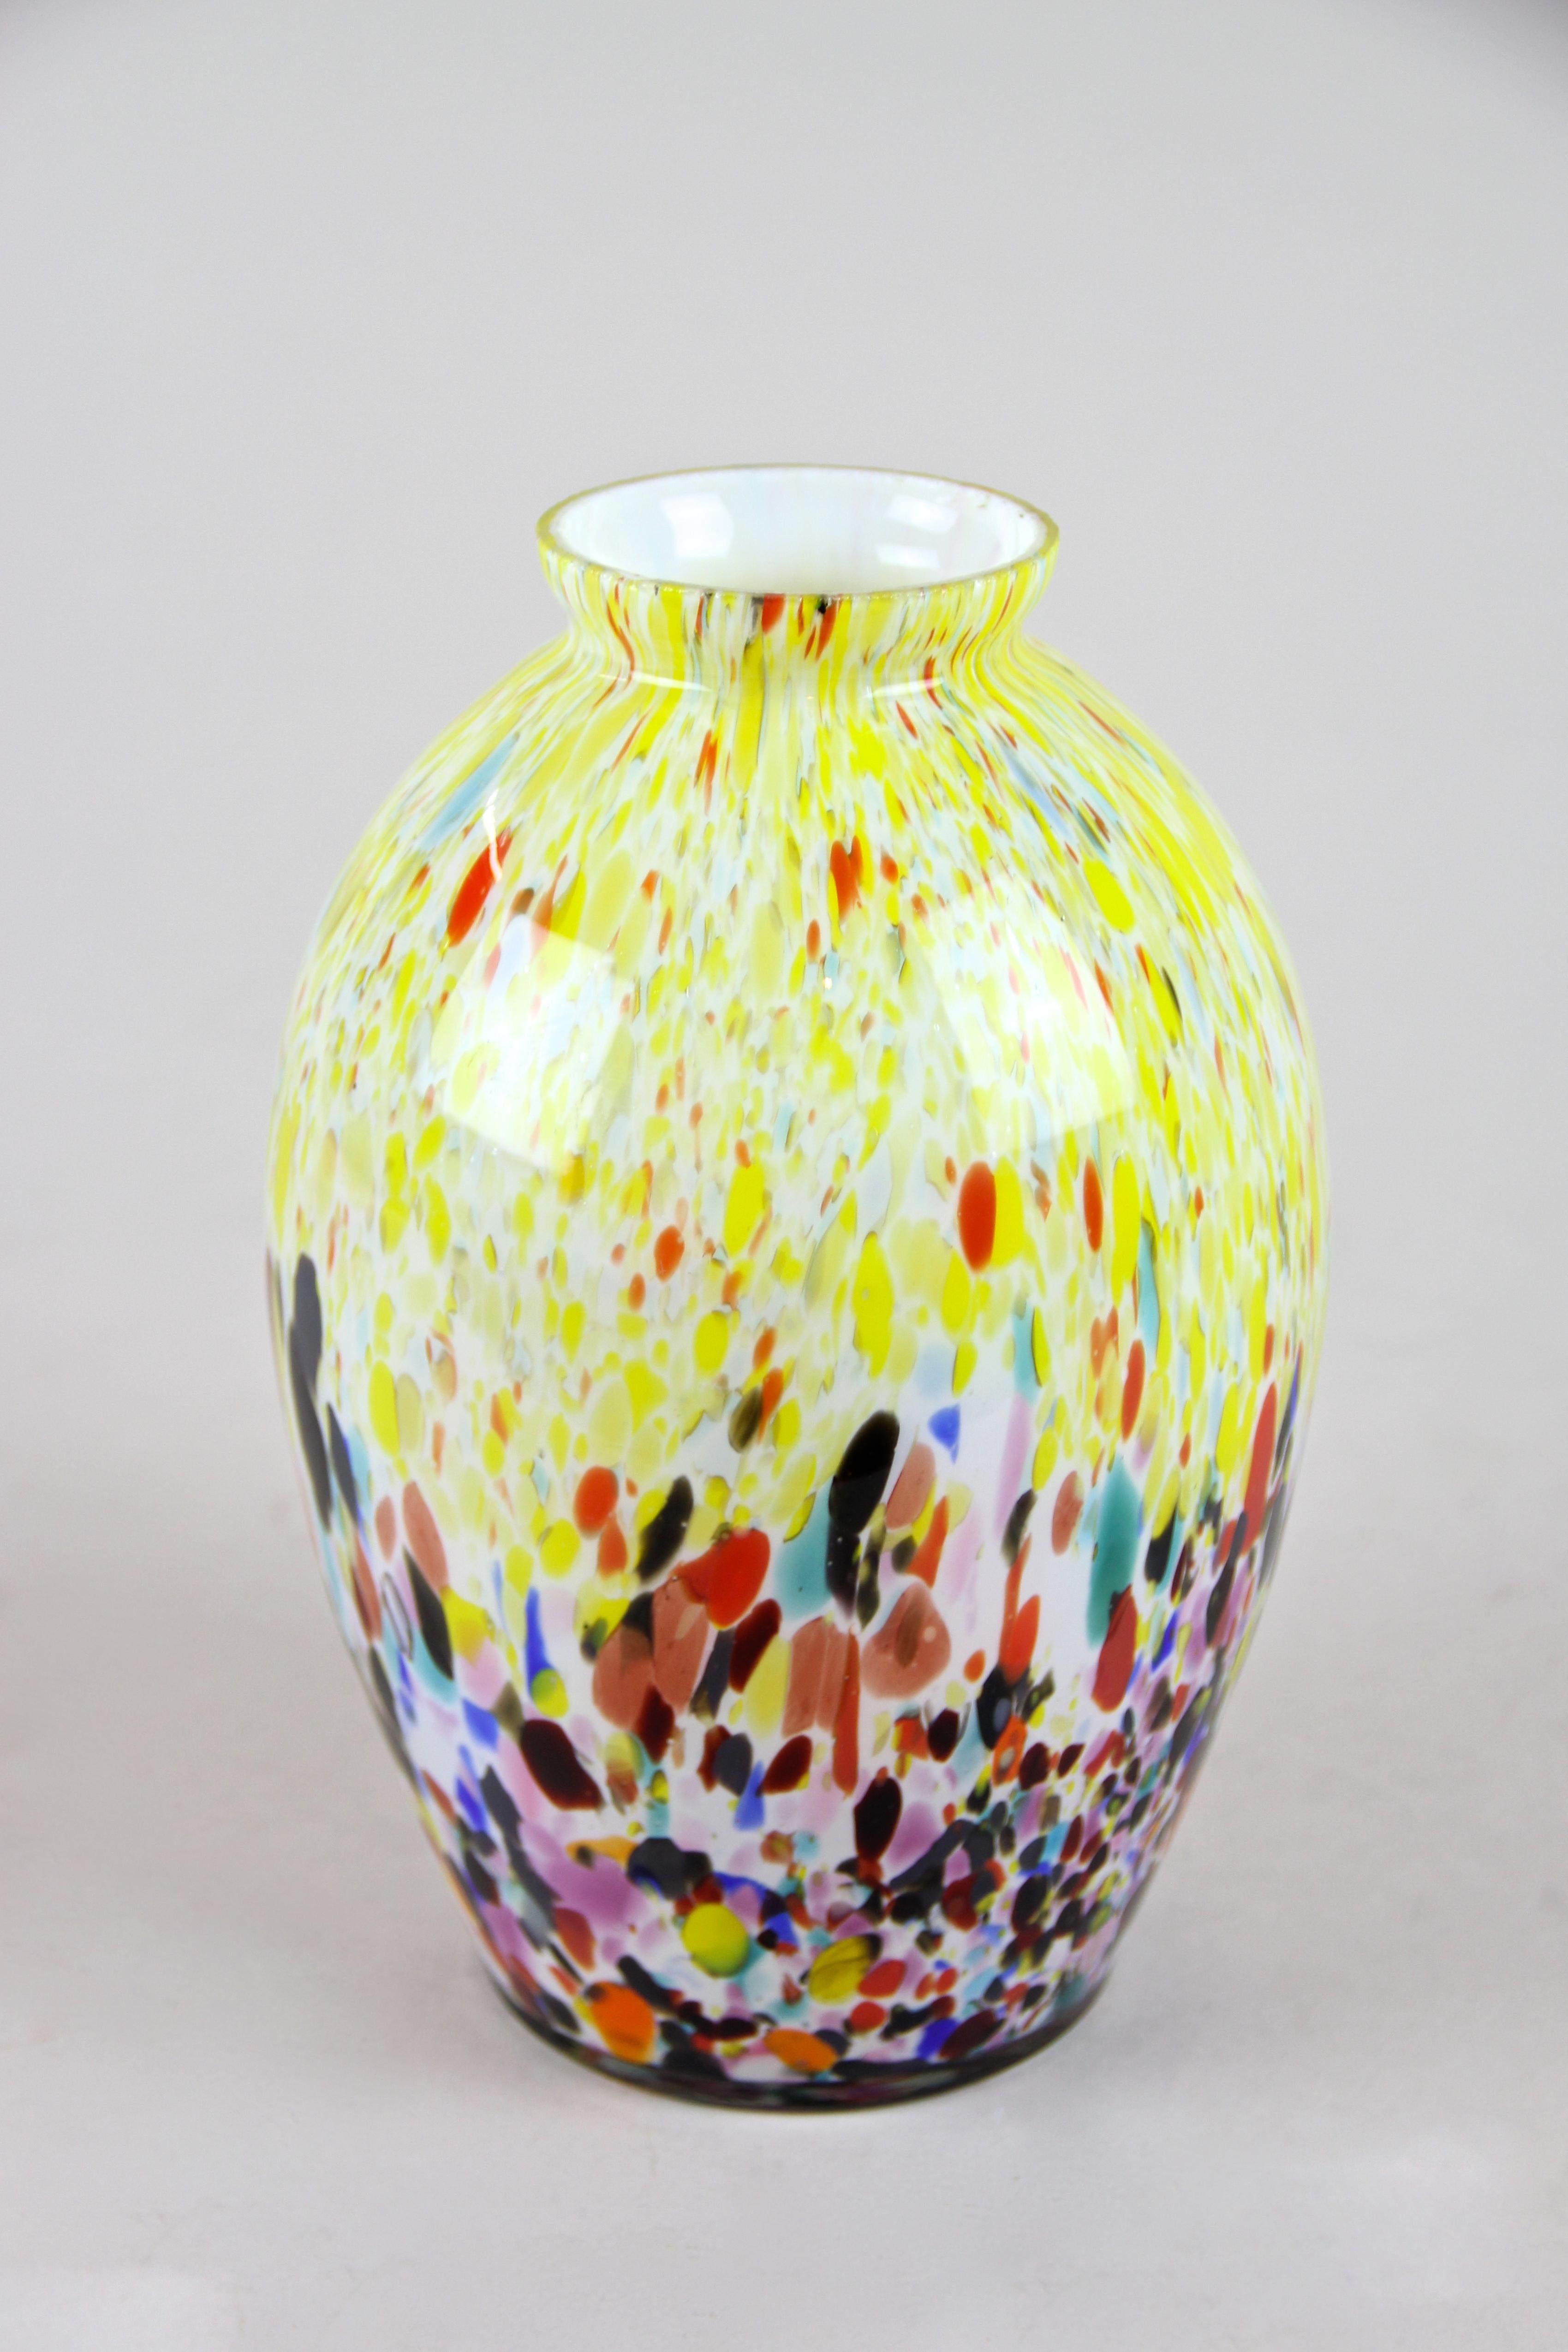 Beautiful multicolored Murano glass vase from the midcentury, circa 1960. This bulbous shaped glass vase shows a very nice spotty design in many different color tones from yellow, blue, turquoise, red, orange over to pink and black. A unique piece